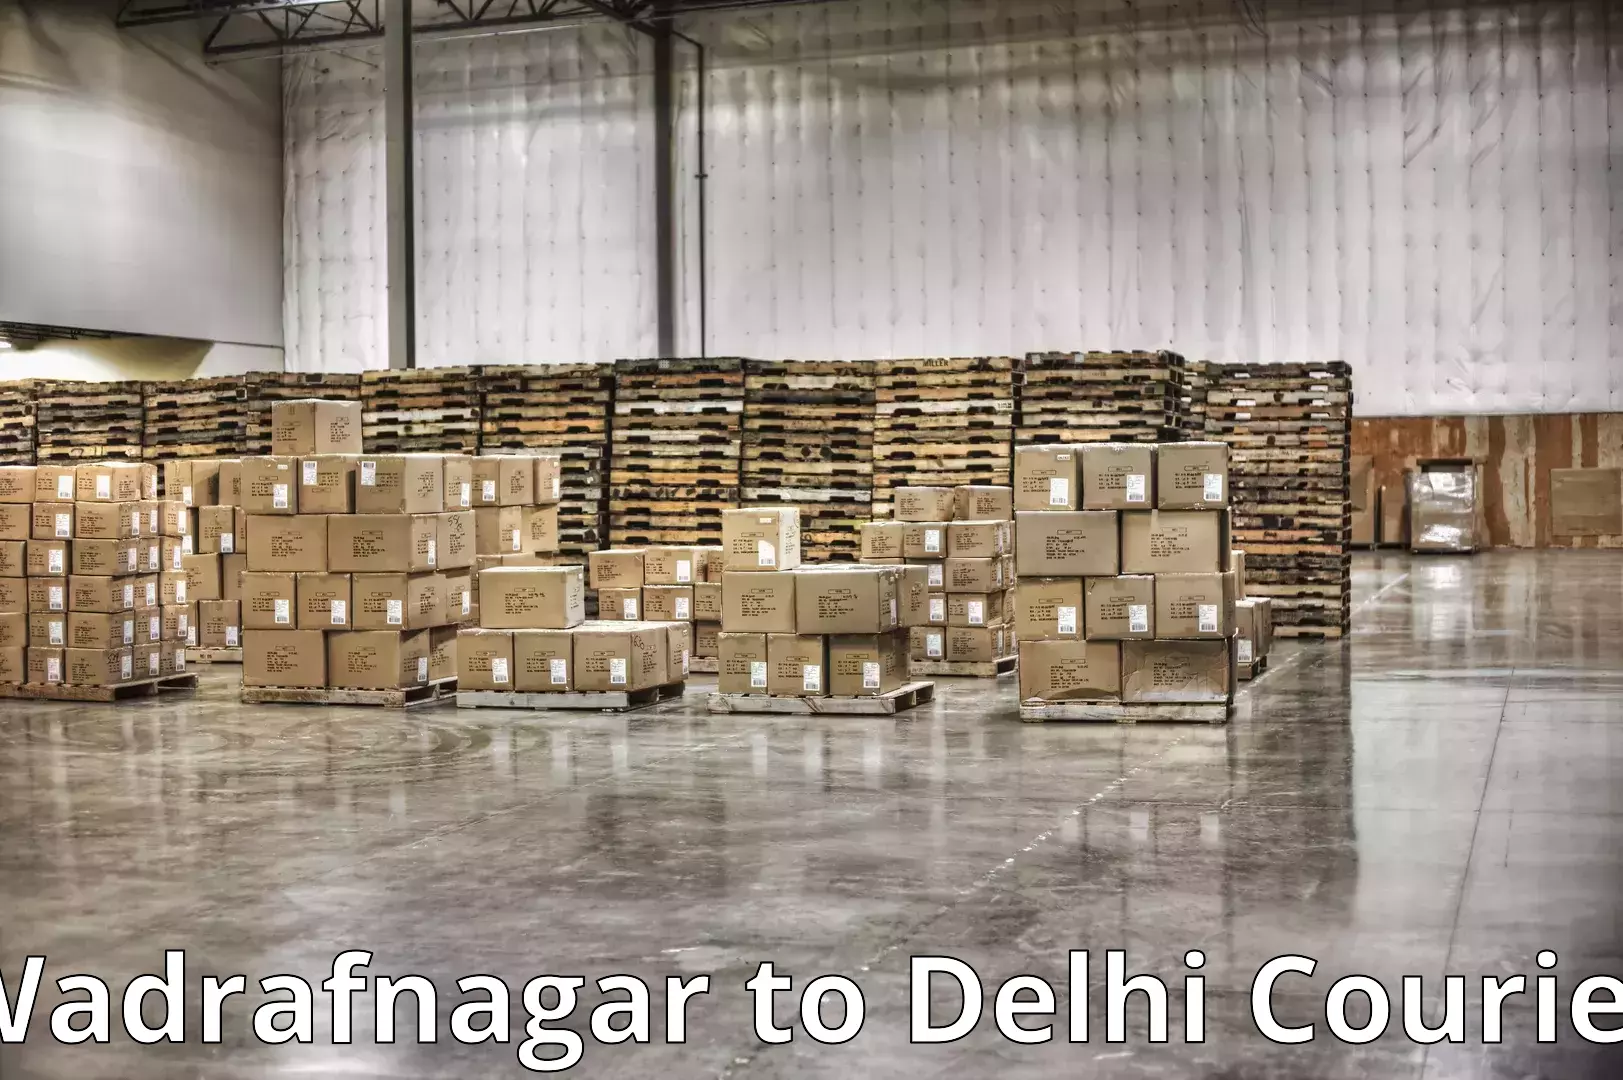 Smooth moving experience in Wadrafnagar to Indraprastha